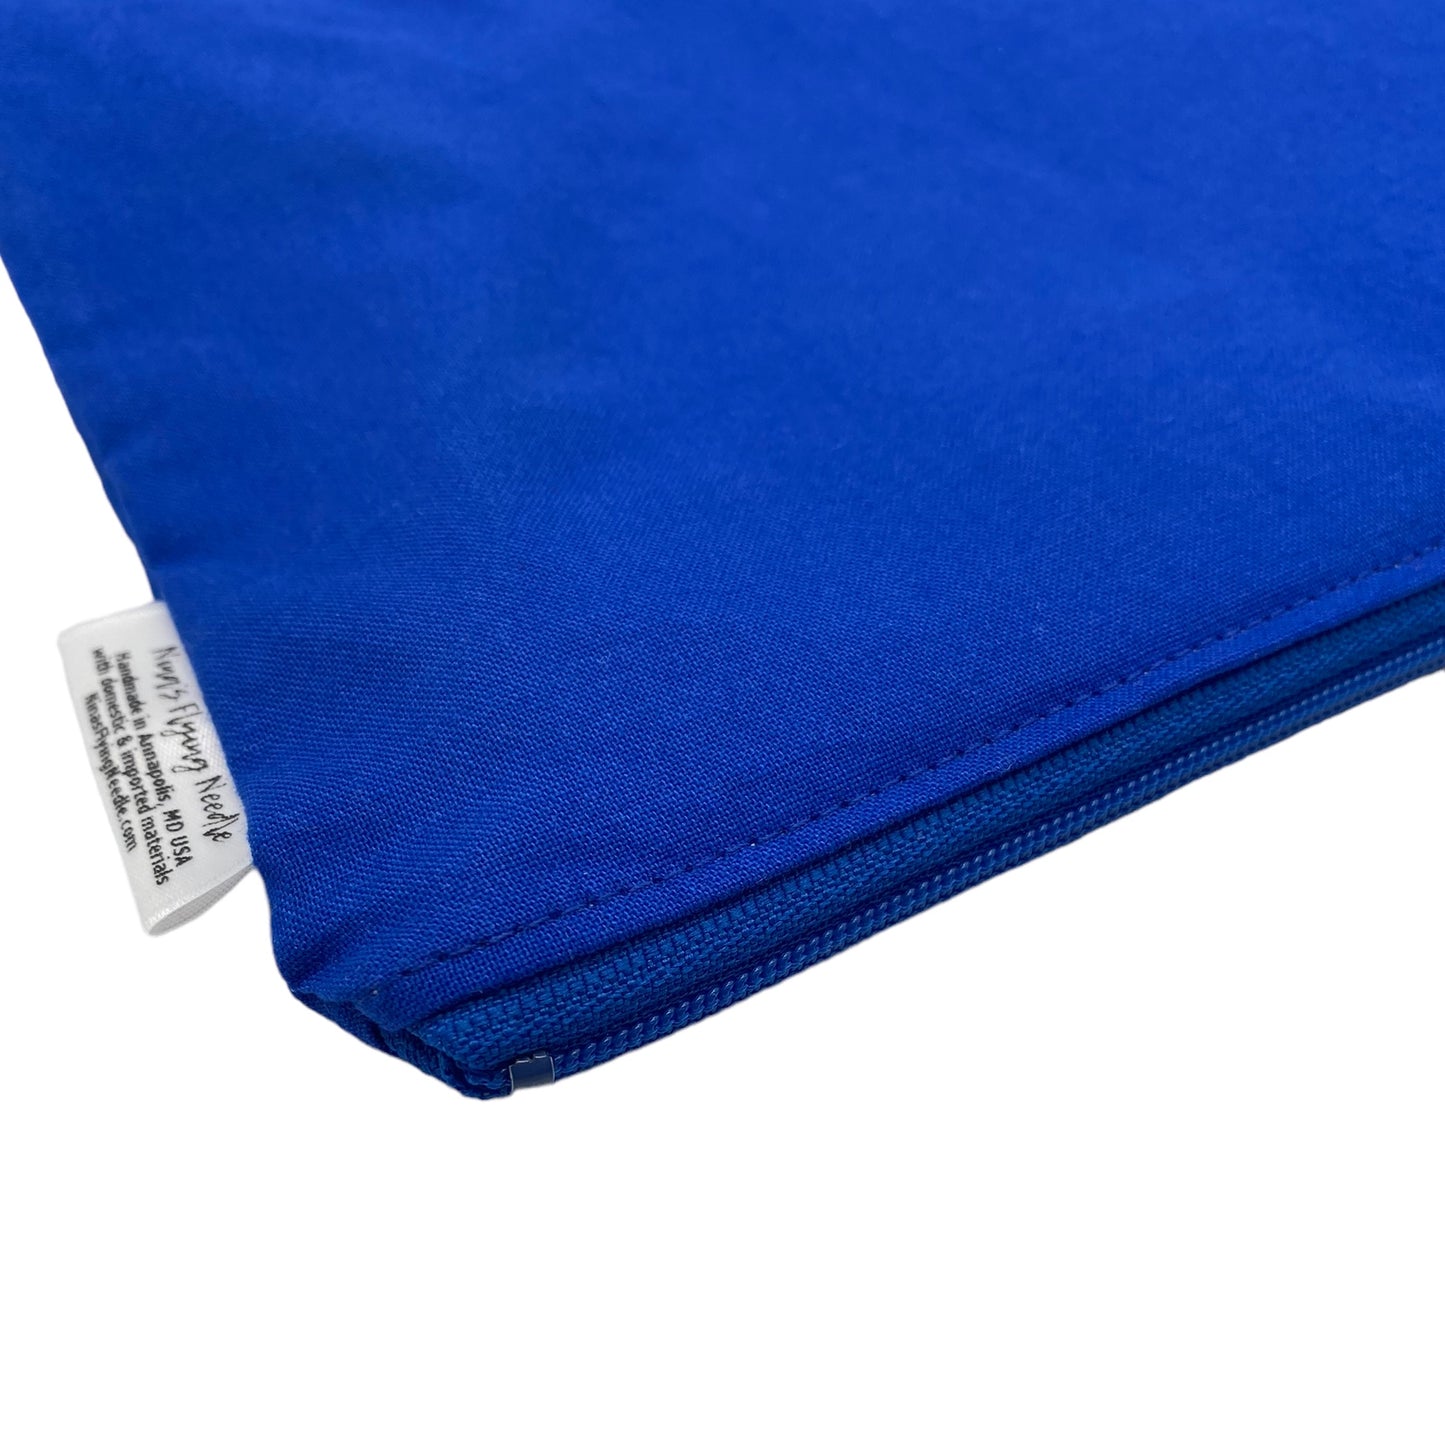 Sandwich Sized Reusable Zippered Bag Solid Royal Blue